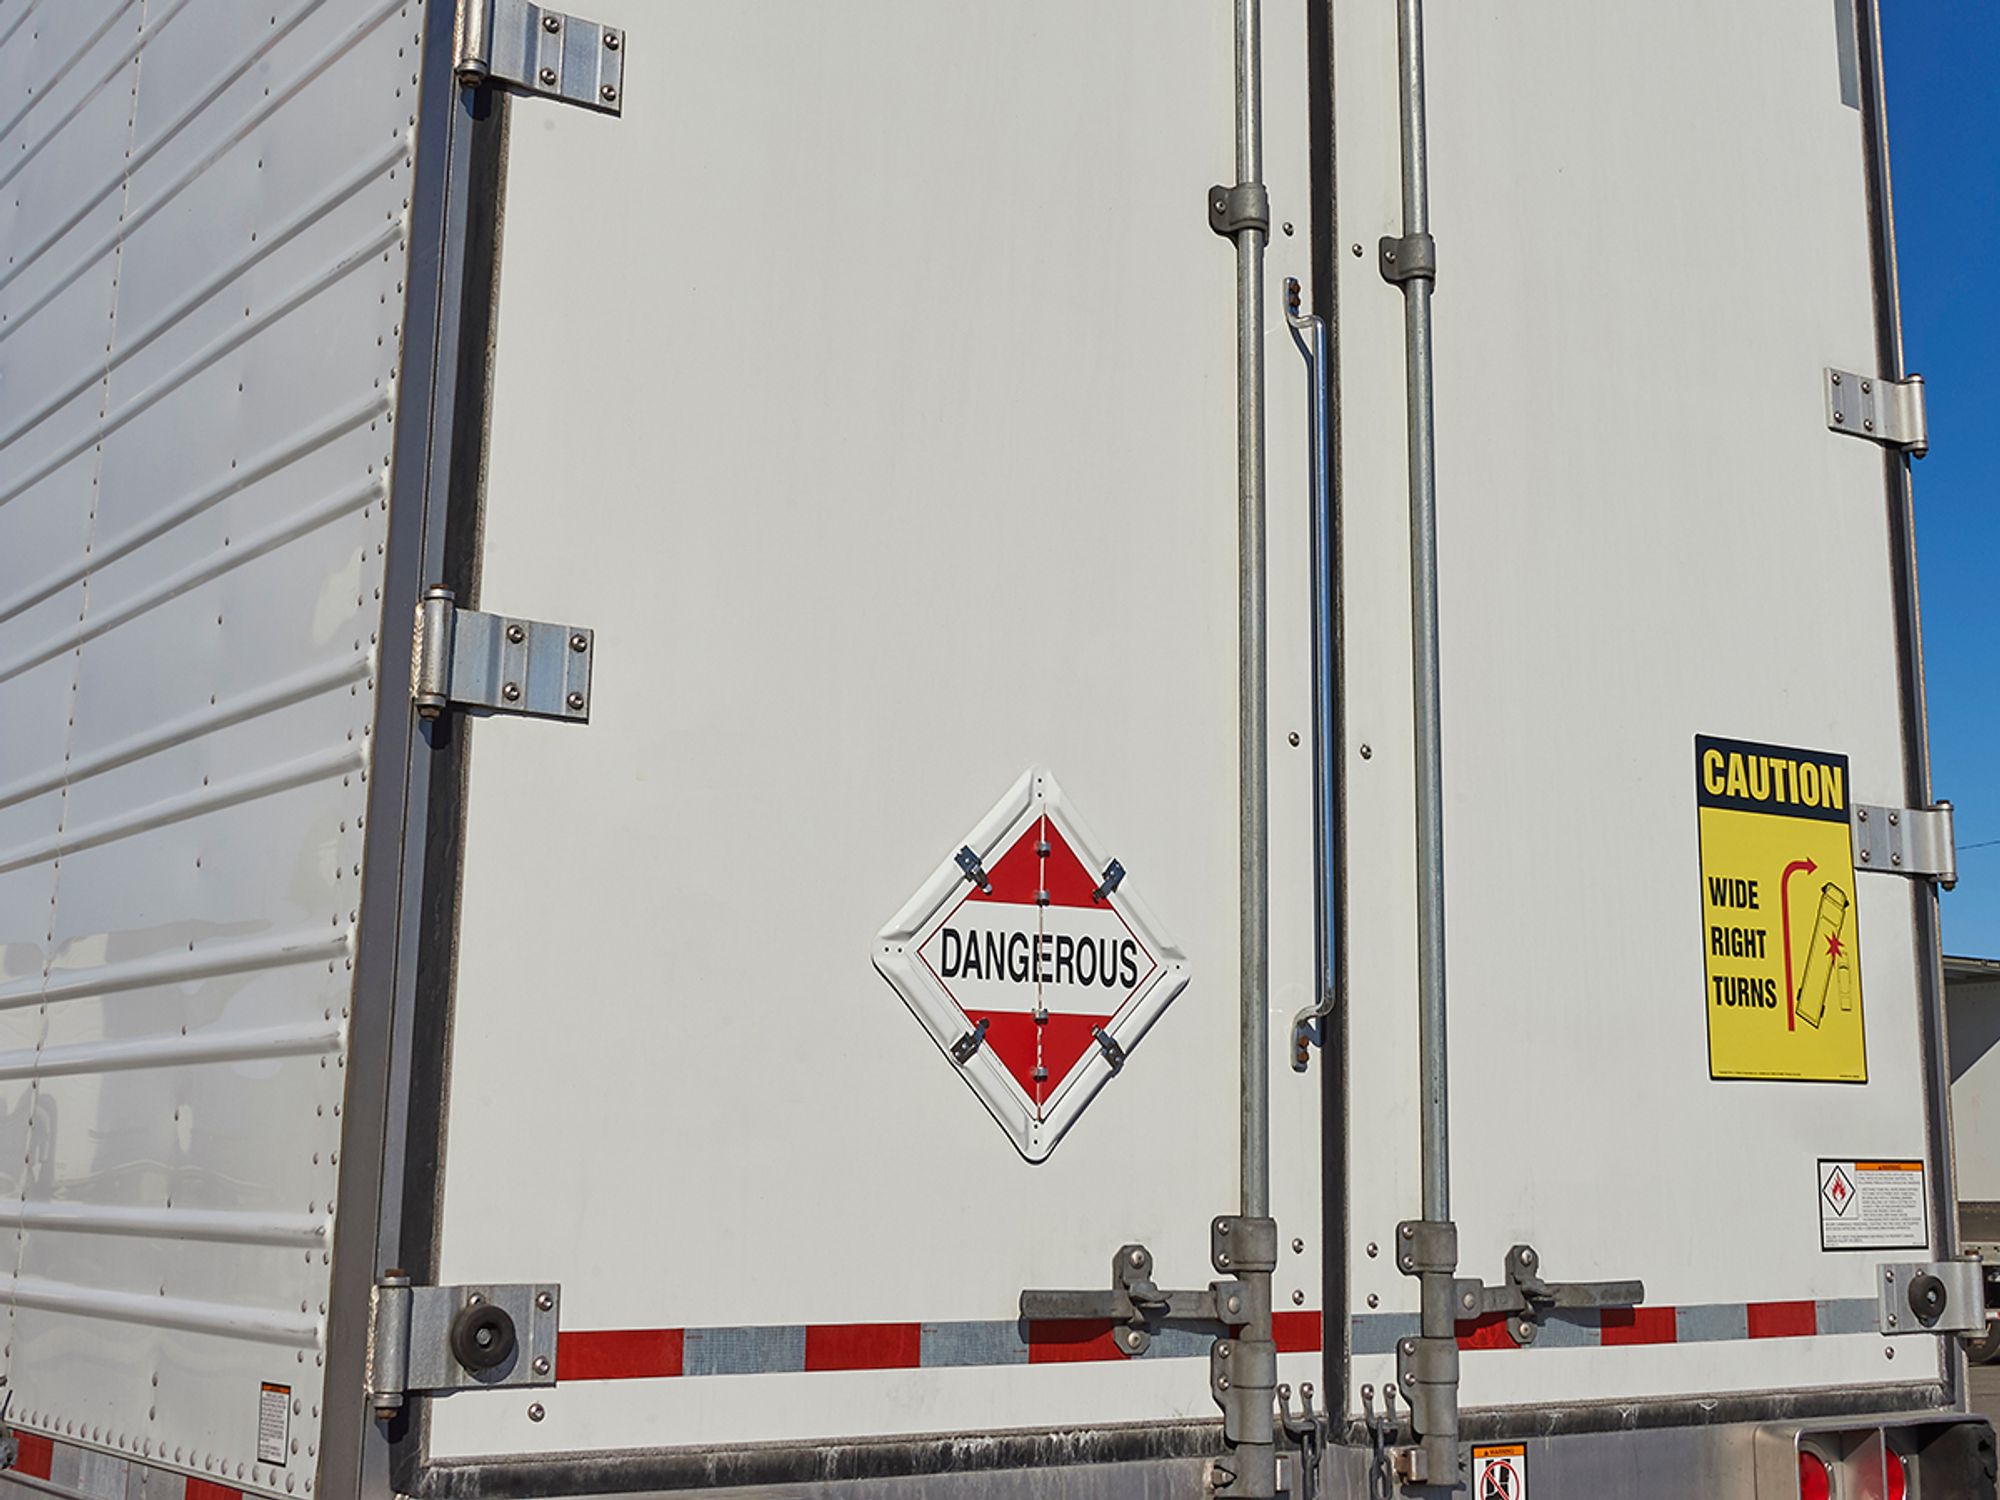 Who regulates the transportation of hazardous materials in the US?